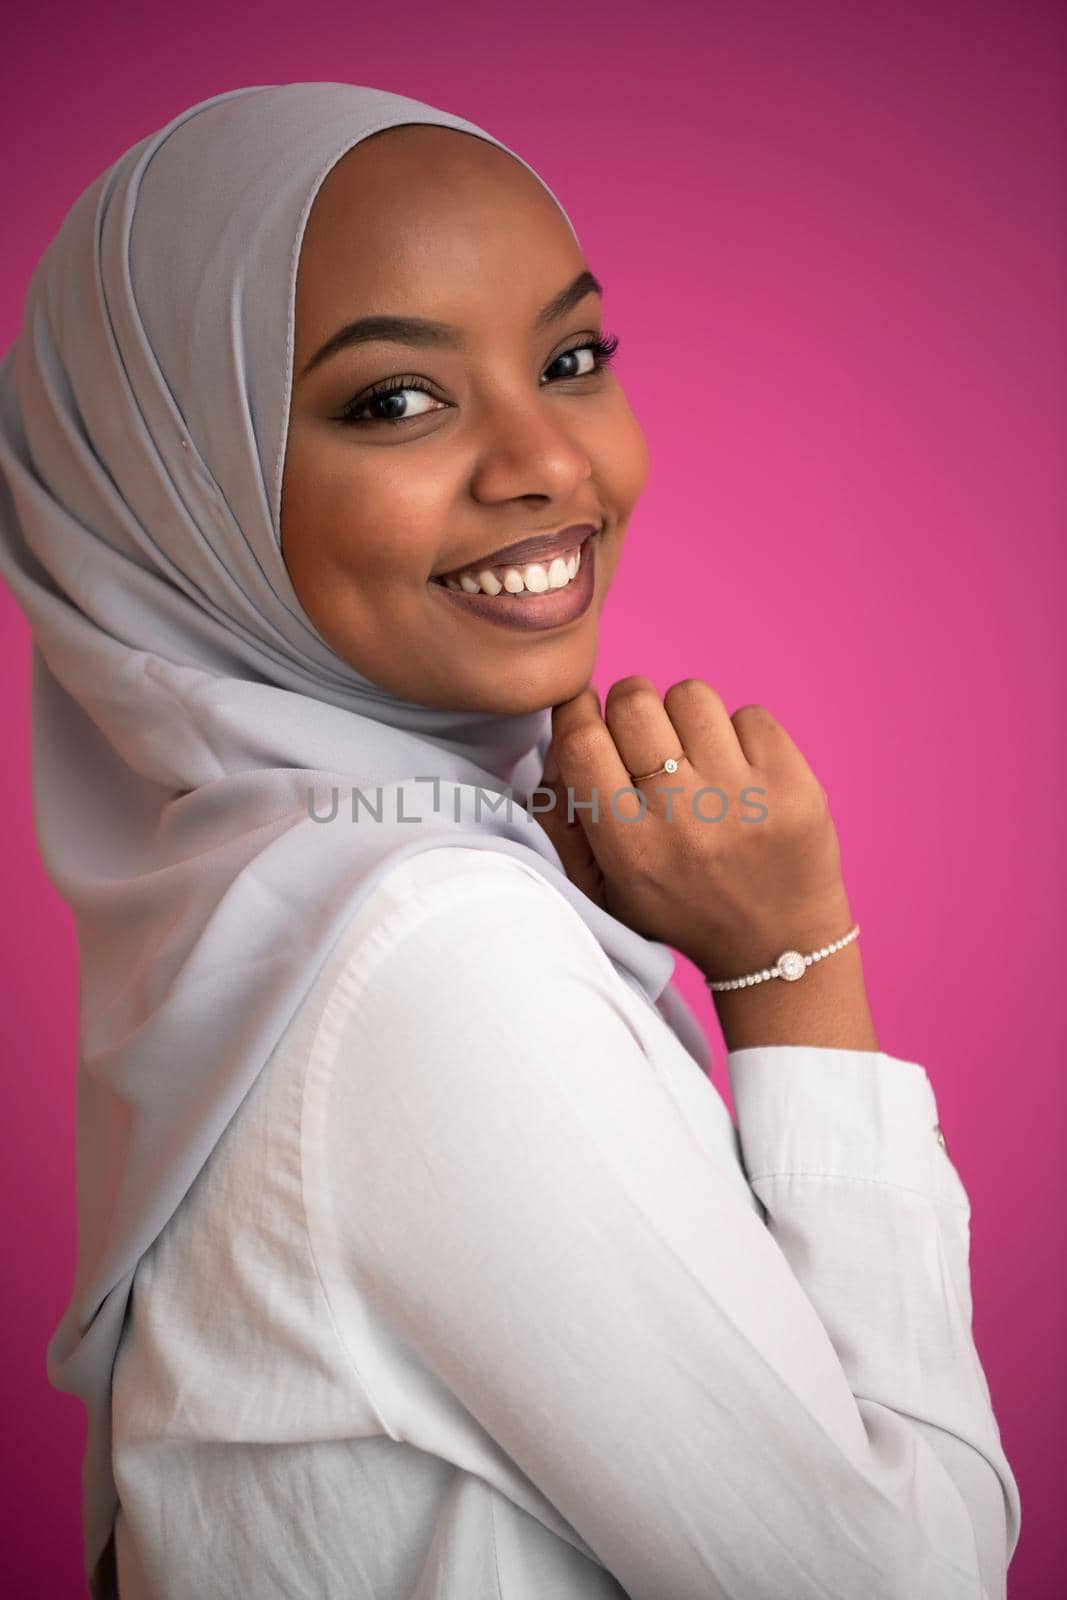 young afro beauty wearing traditional islamic clothes on plastic pink background